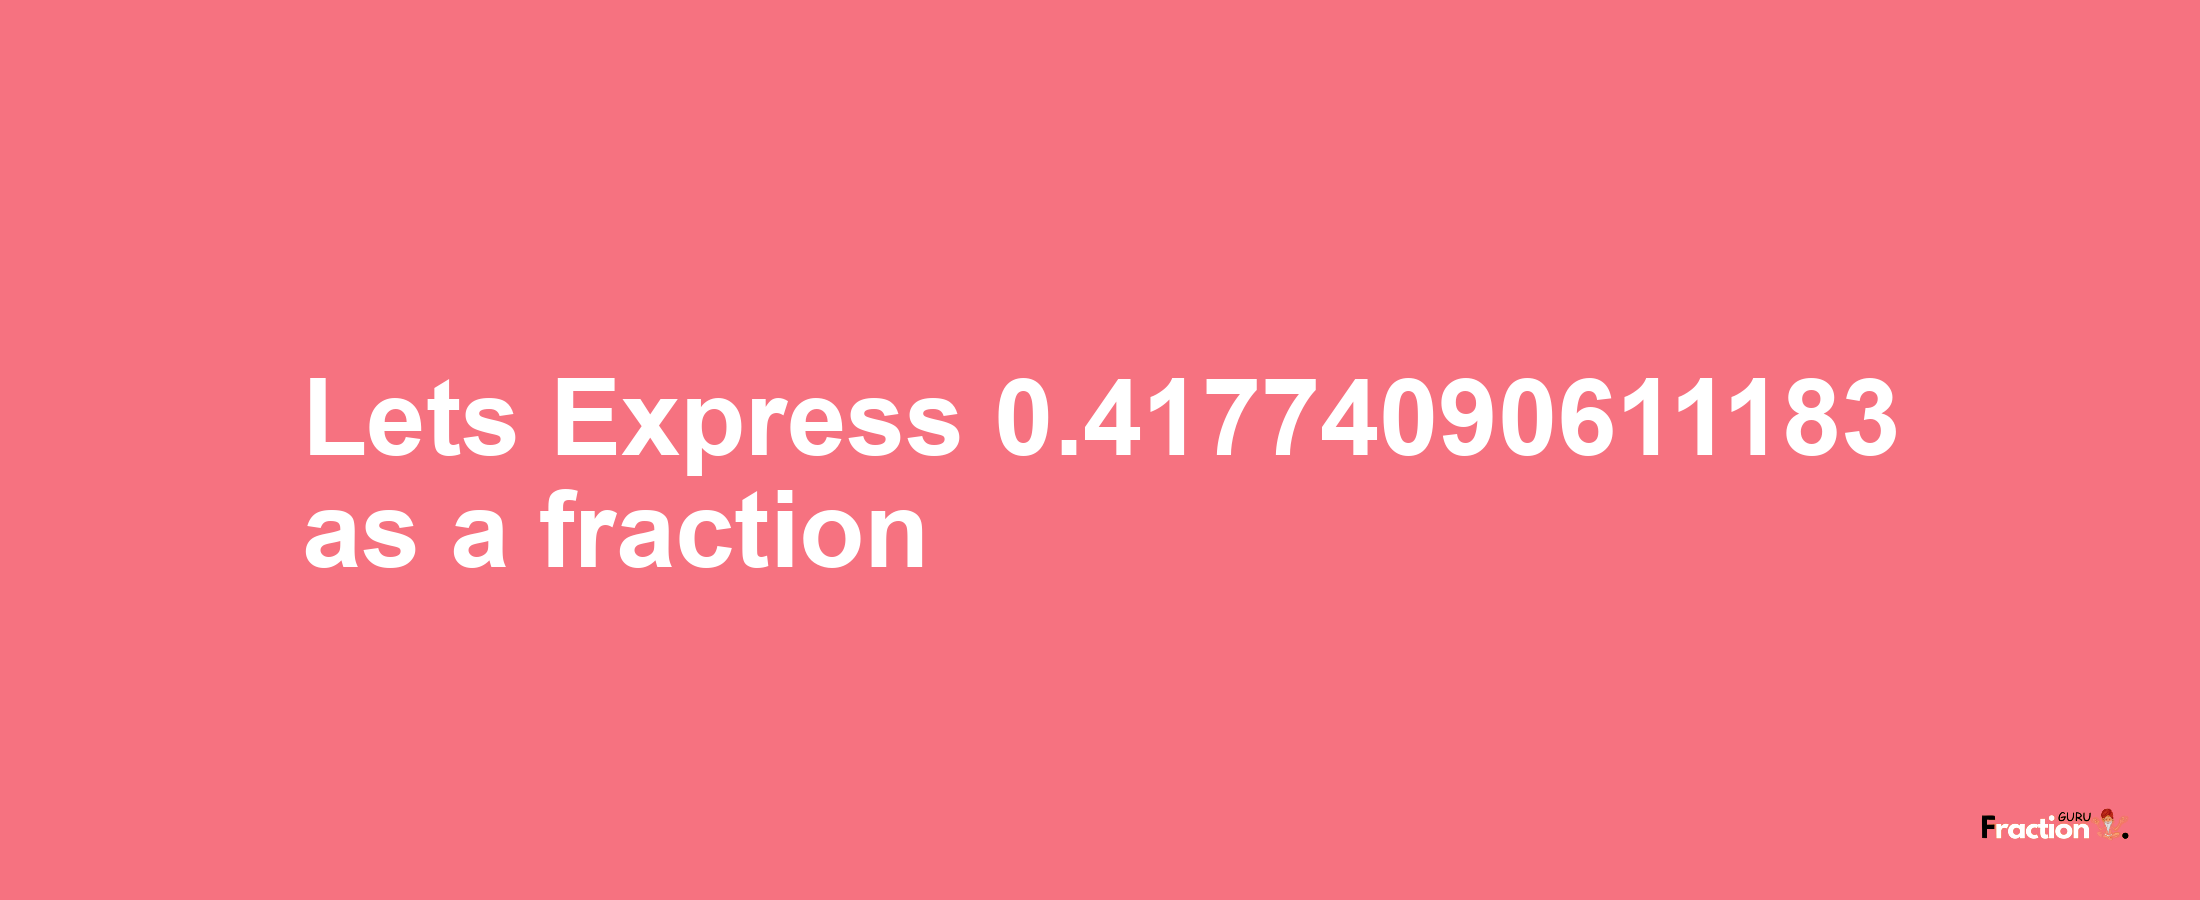 Lets Express 0.41774090611183 as afraction